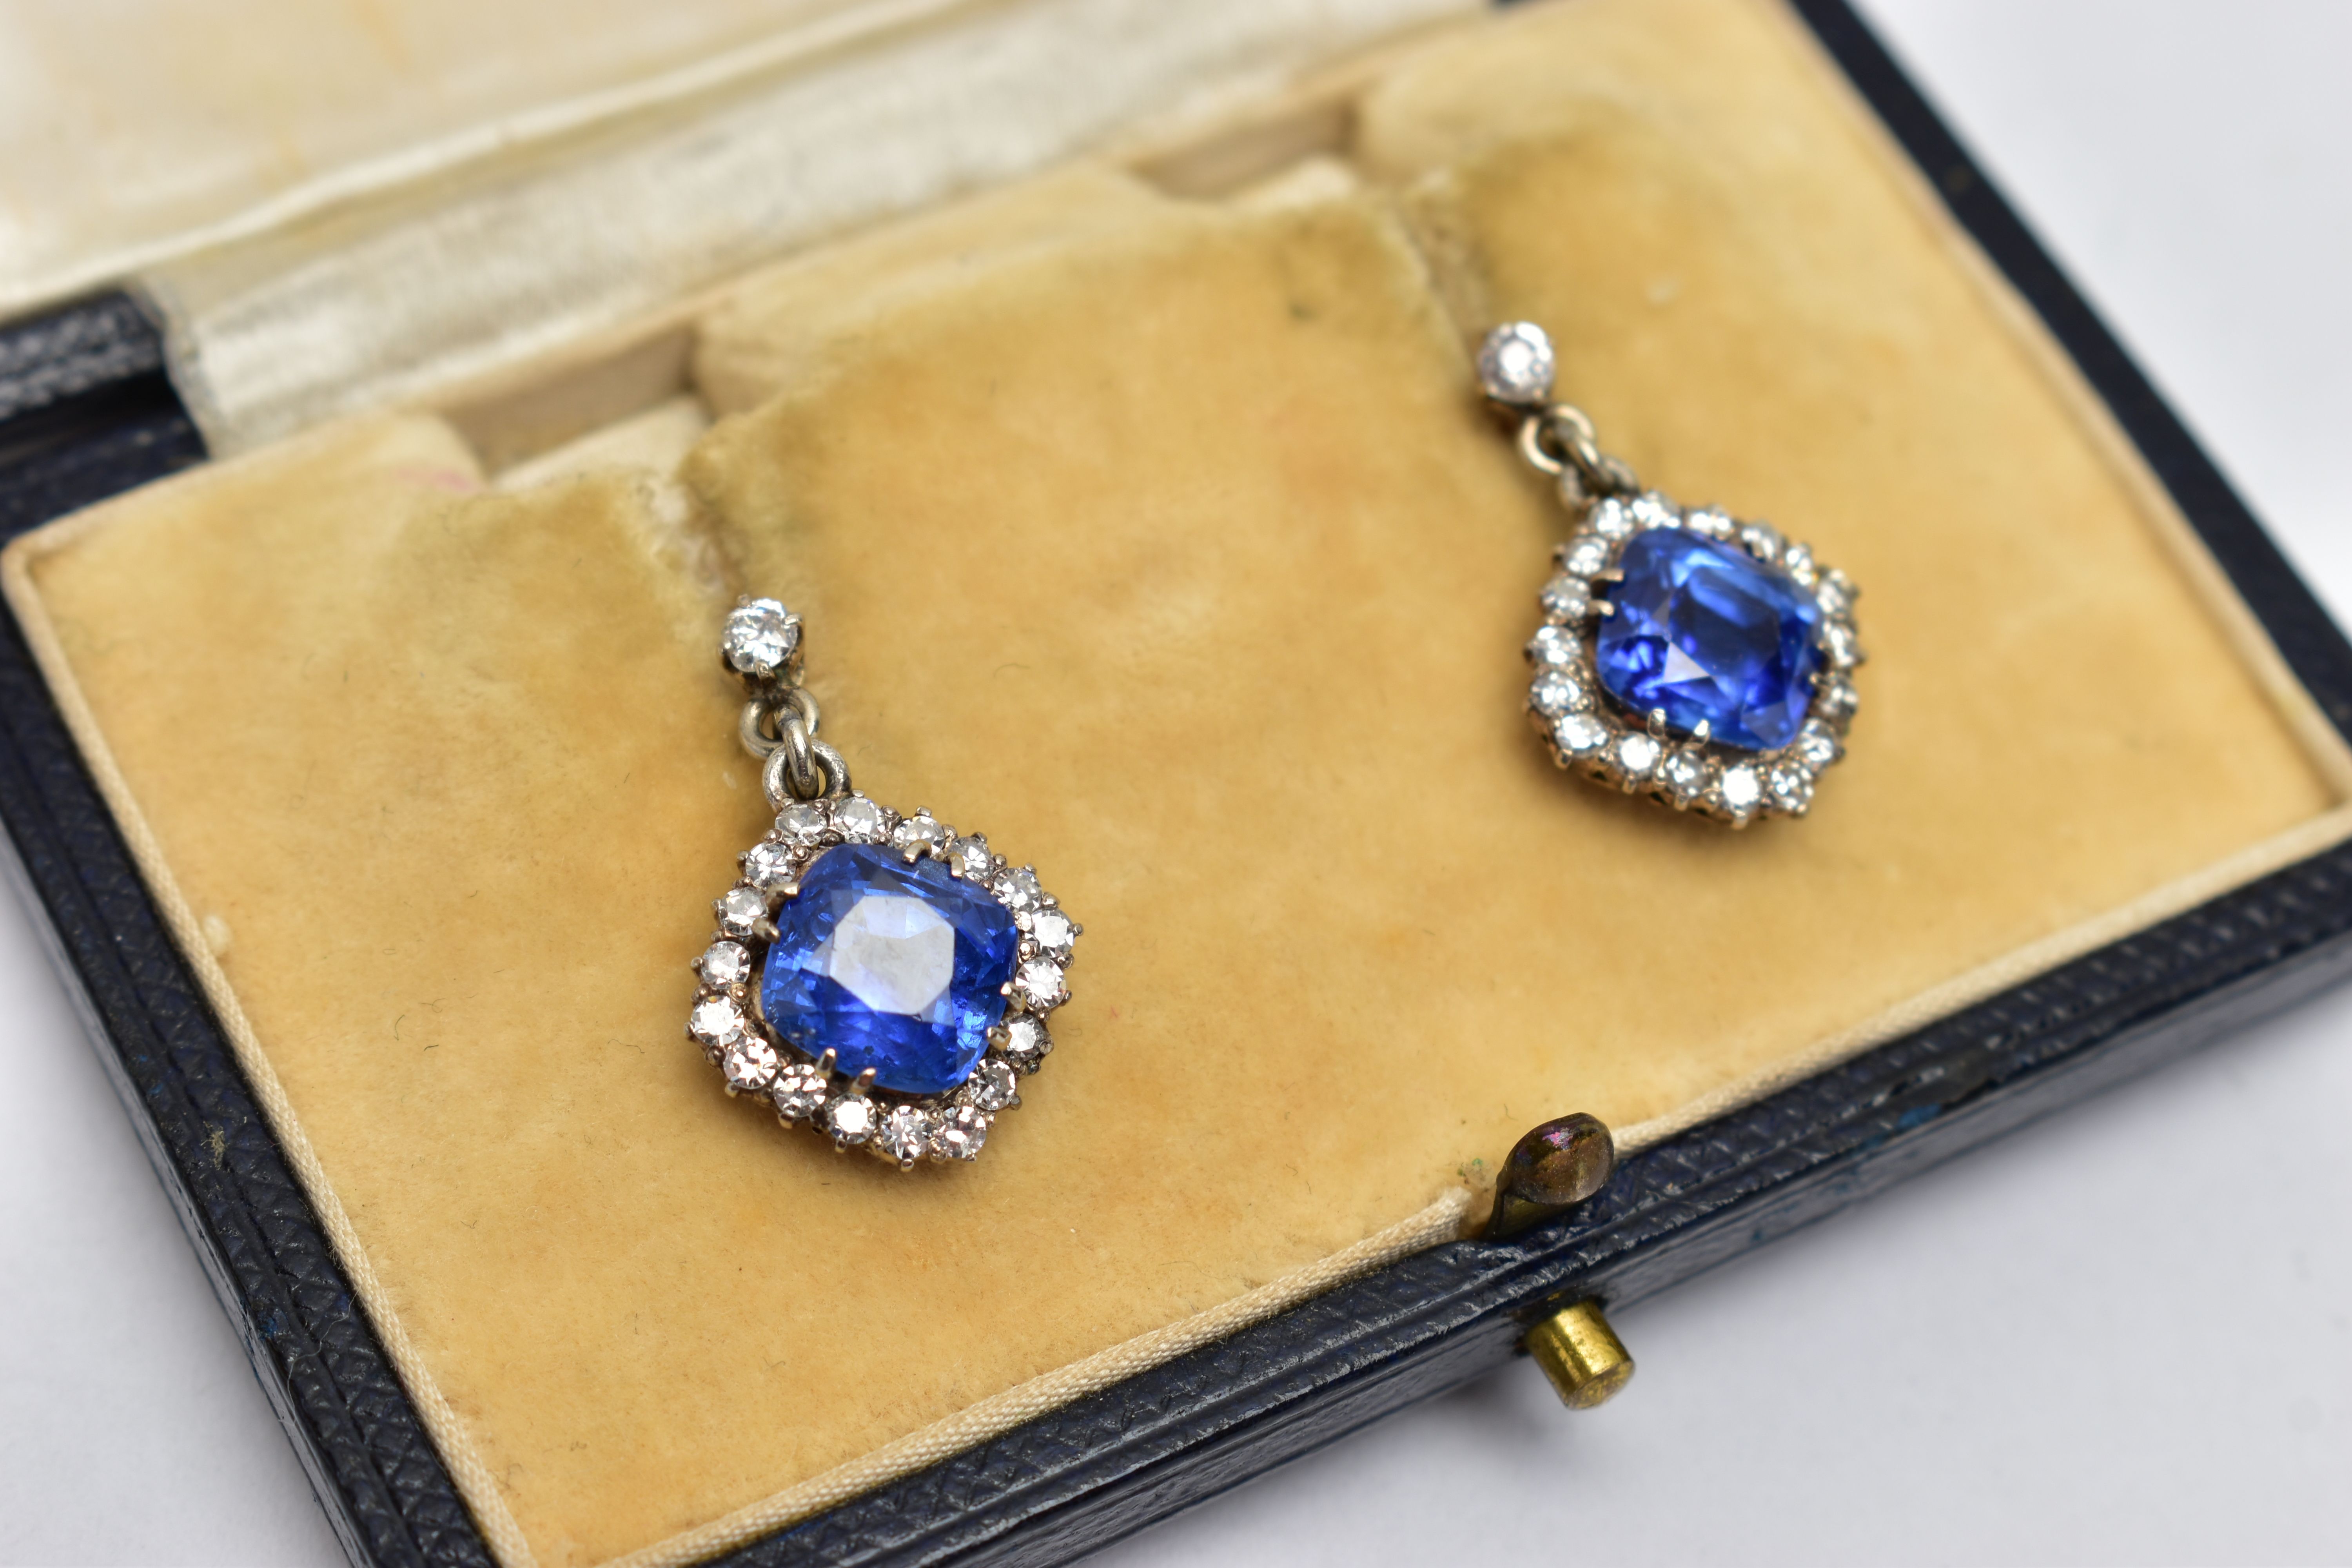 A PAIR OF EARLY 20TH CENTURY SAPPHIRE AND DIAMOND EARRINGS, each earring set with a cushion cut - Image 2 of 11